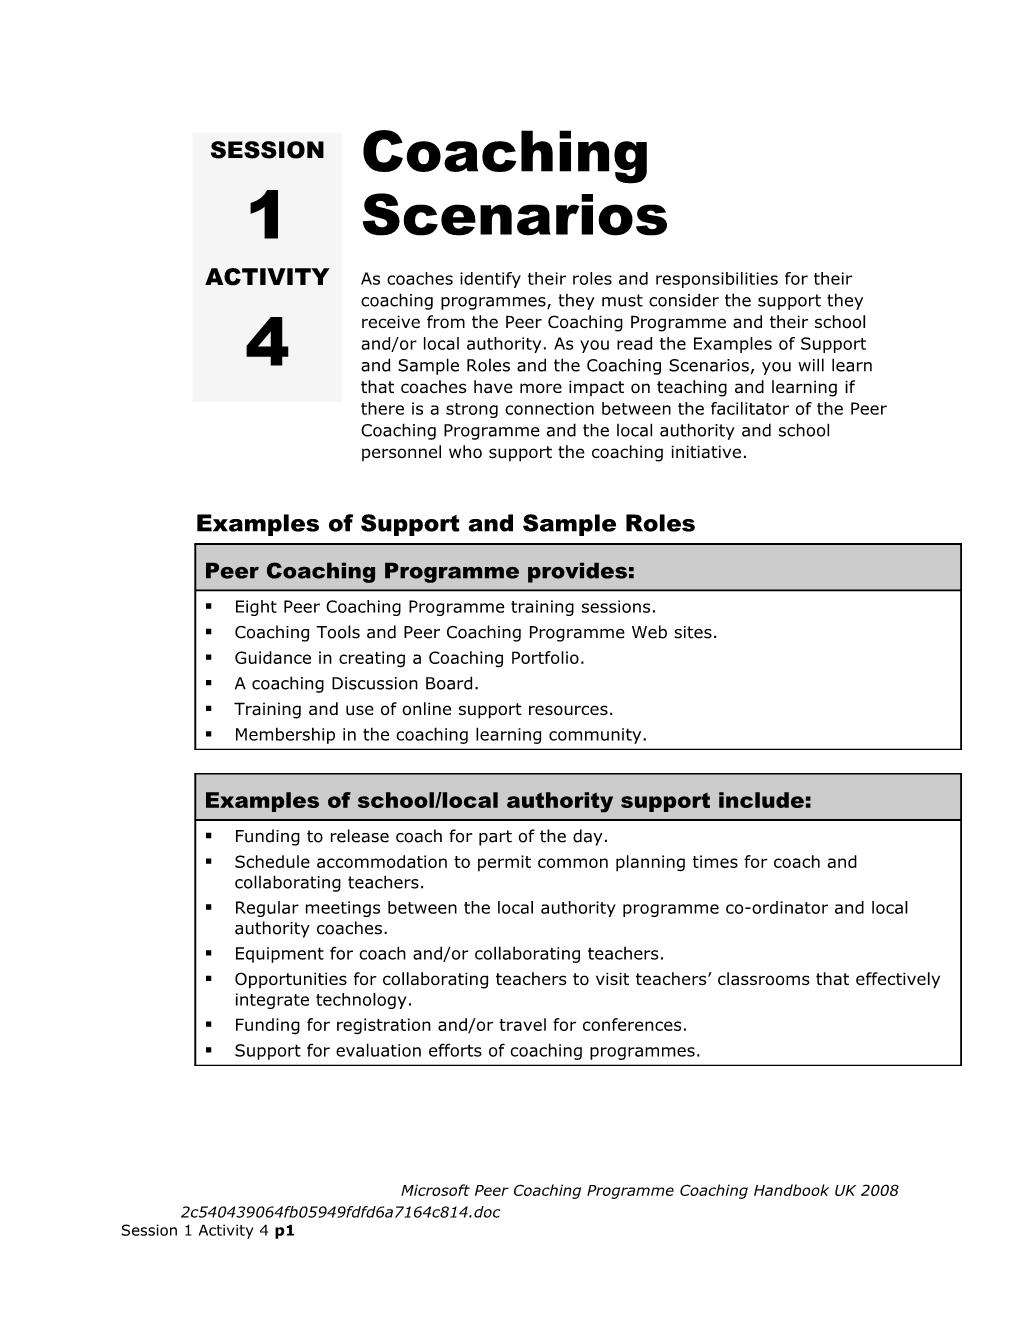 Examples of Support and Sample Roles